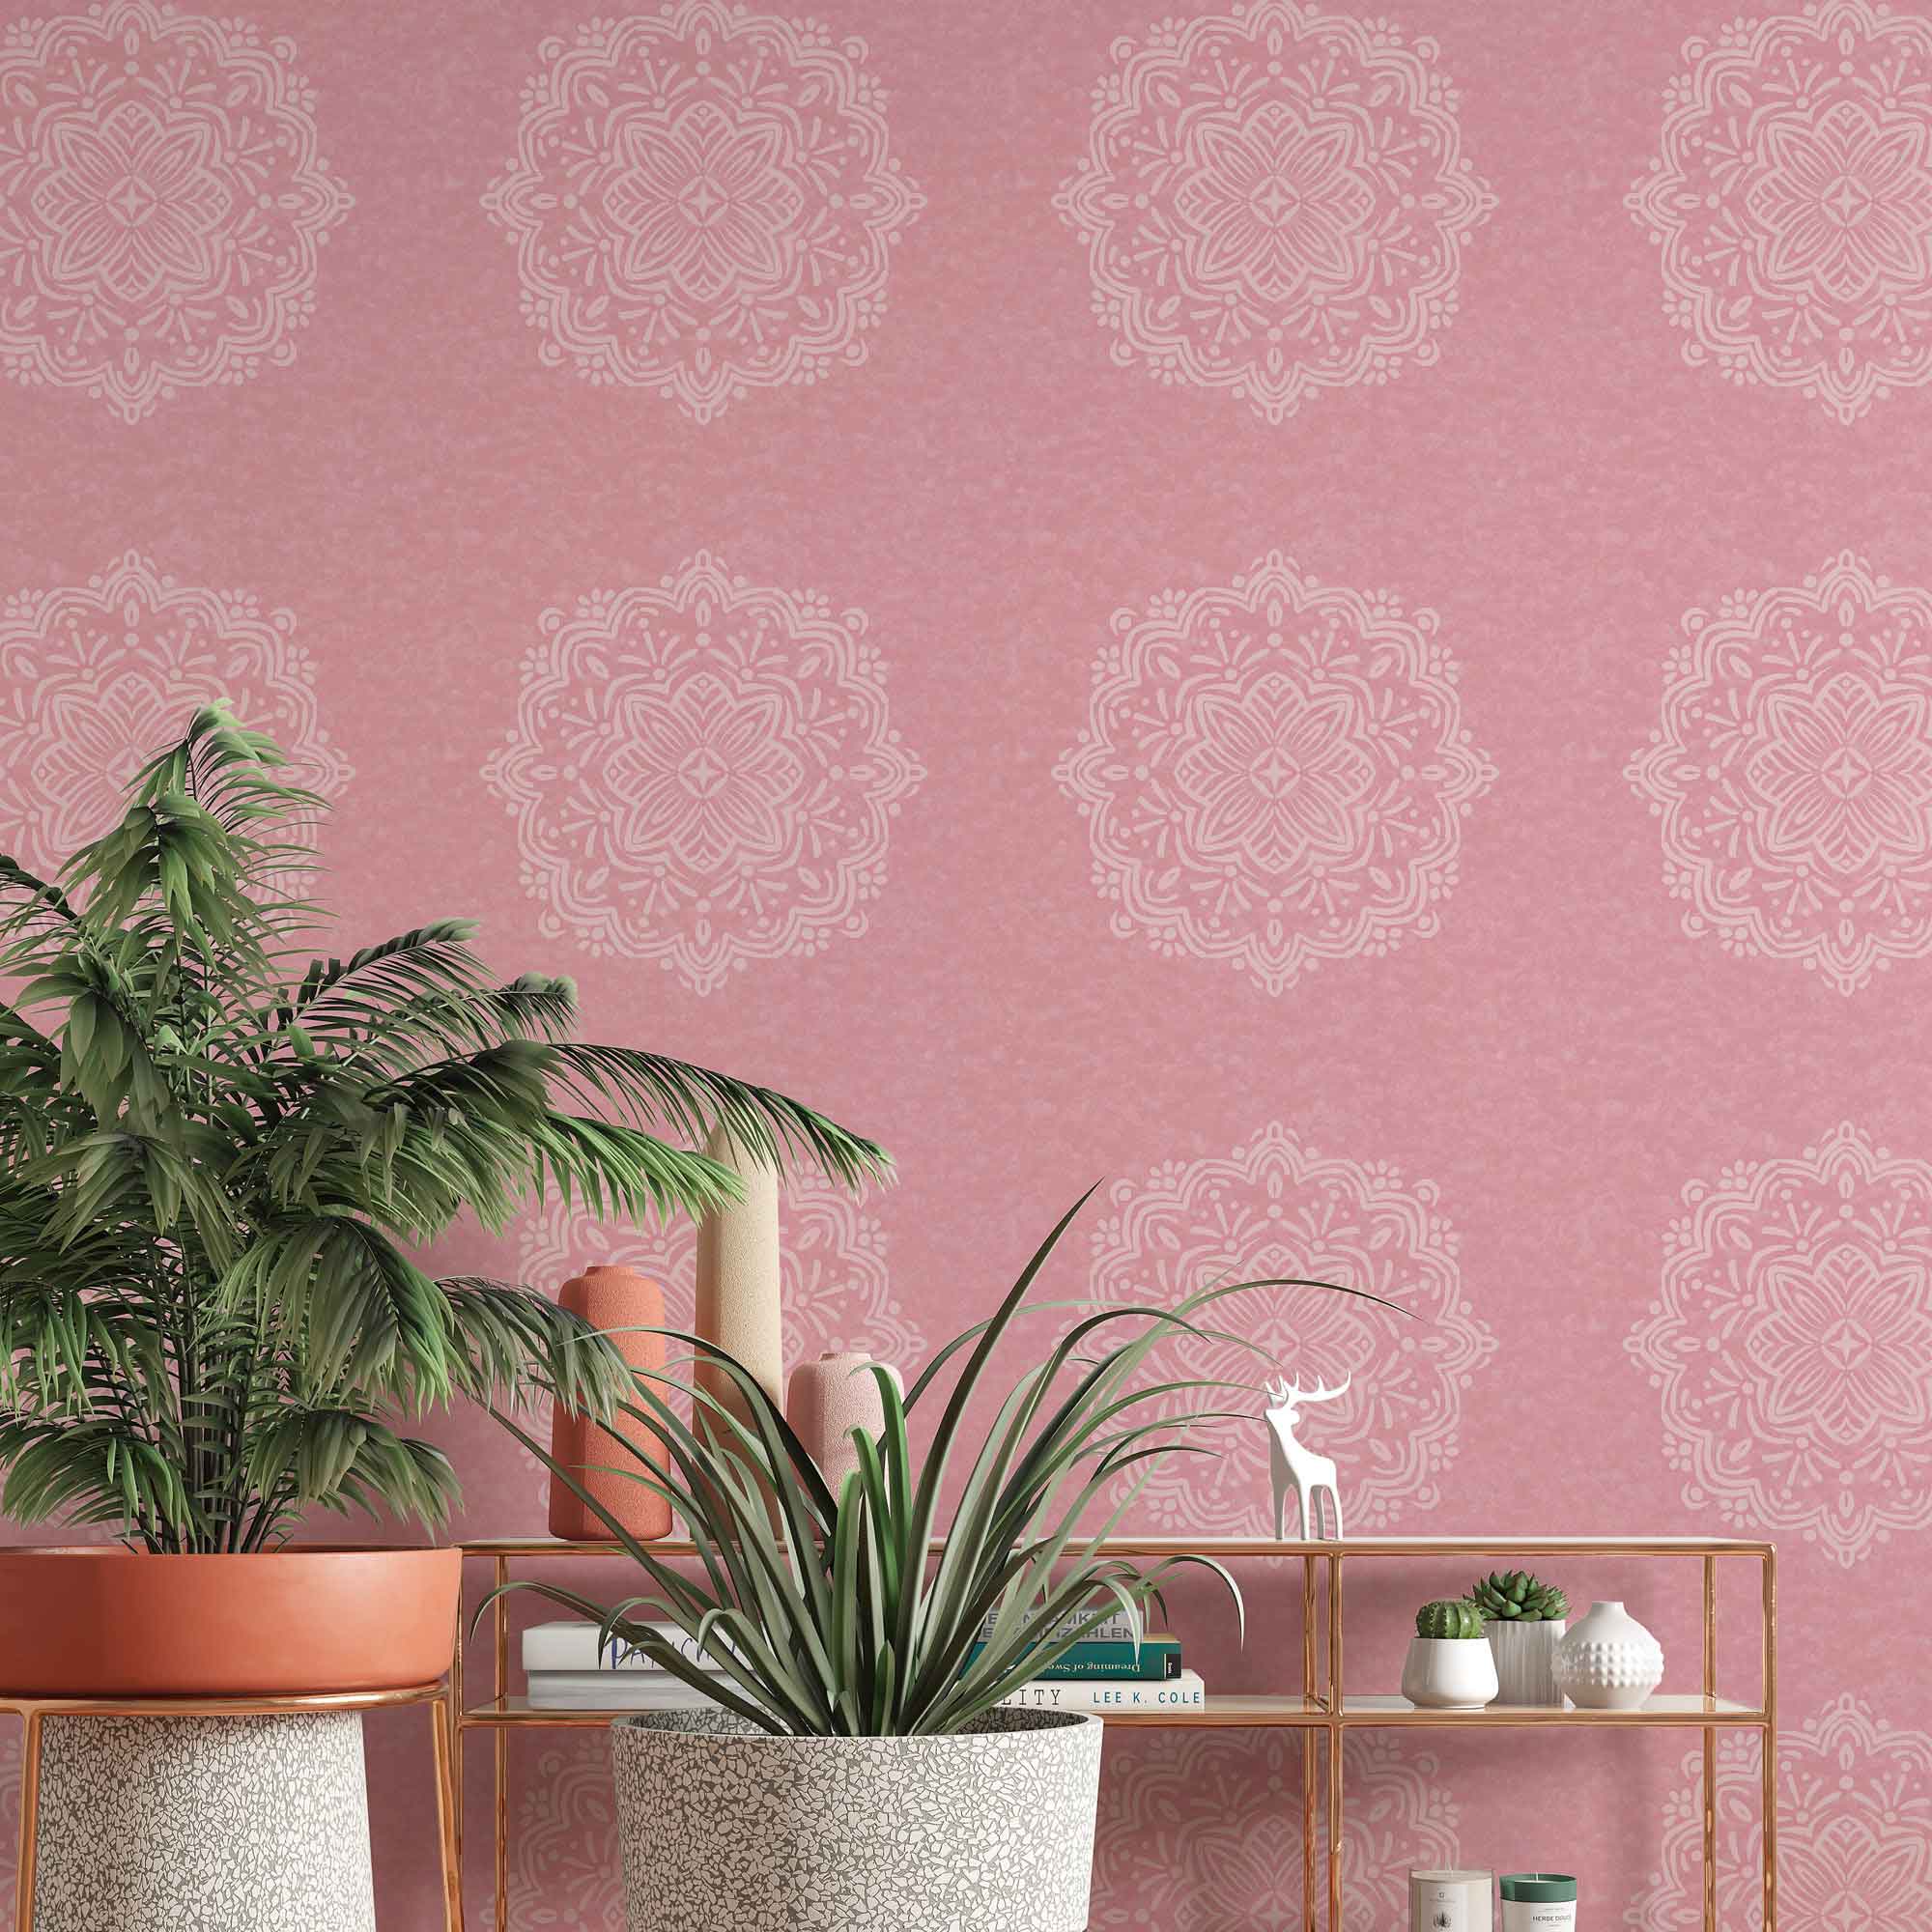 Simple Hand-Drawn Boho Mandalas on Rose Colored Background Removable Peel & Stick and Pre-Pasted Wallpaper - XL Size - Room Example